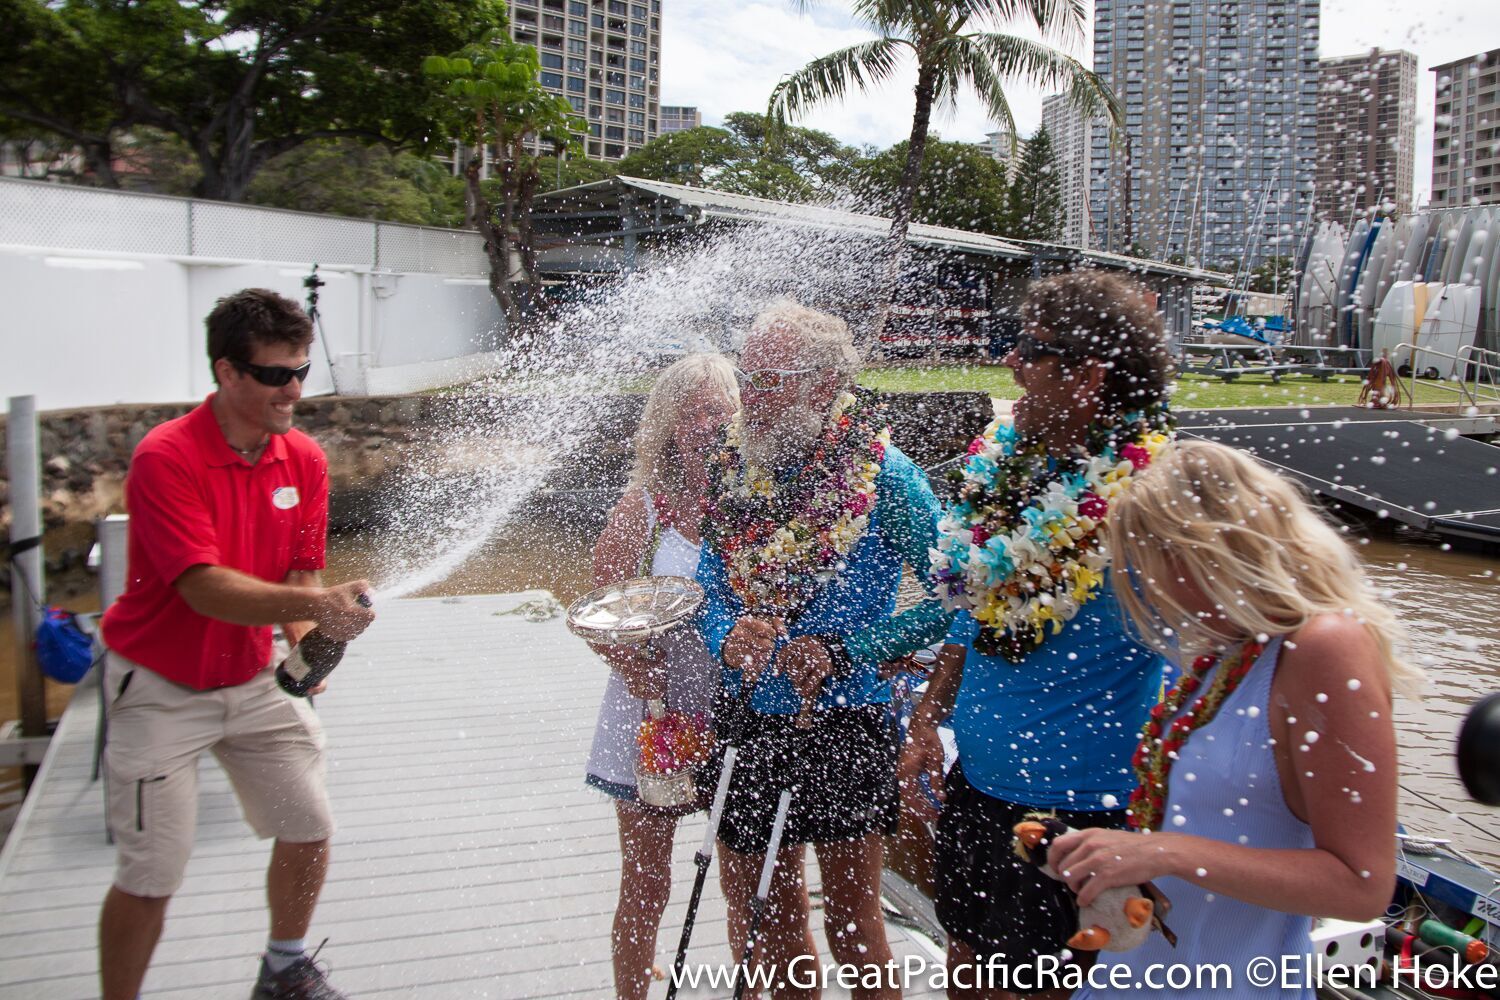 Steve Sparkes and Mick Dawson celebrating at the race finish in Honolulu, Hawaii